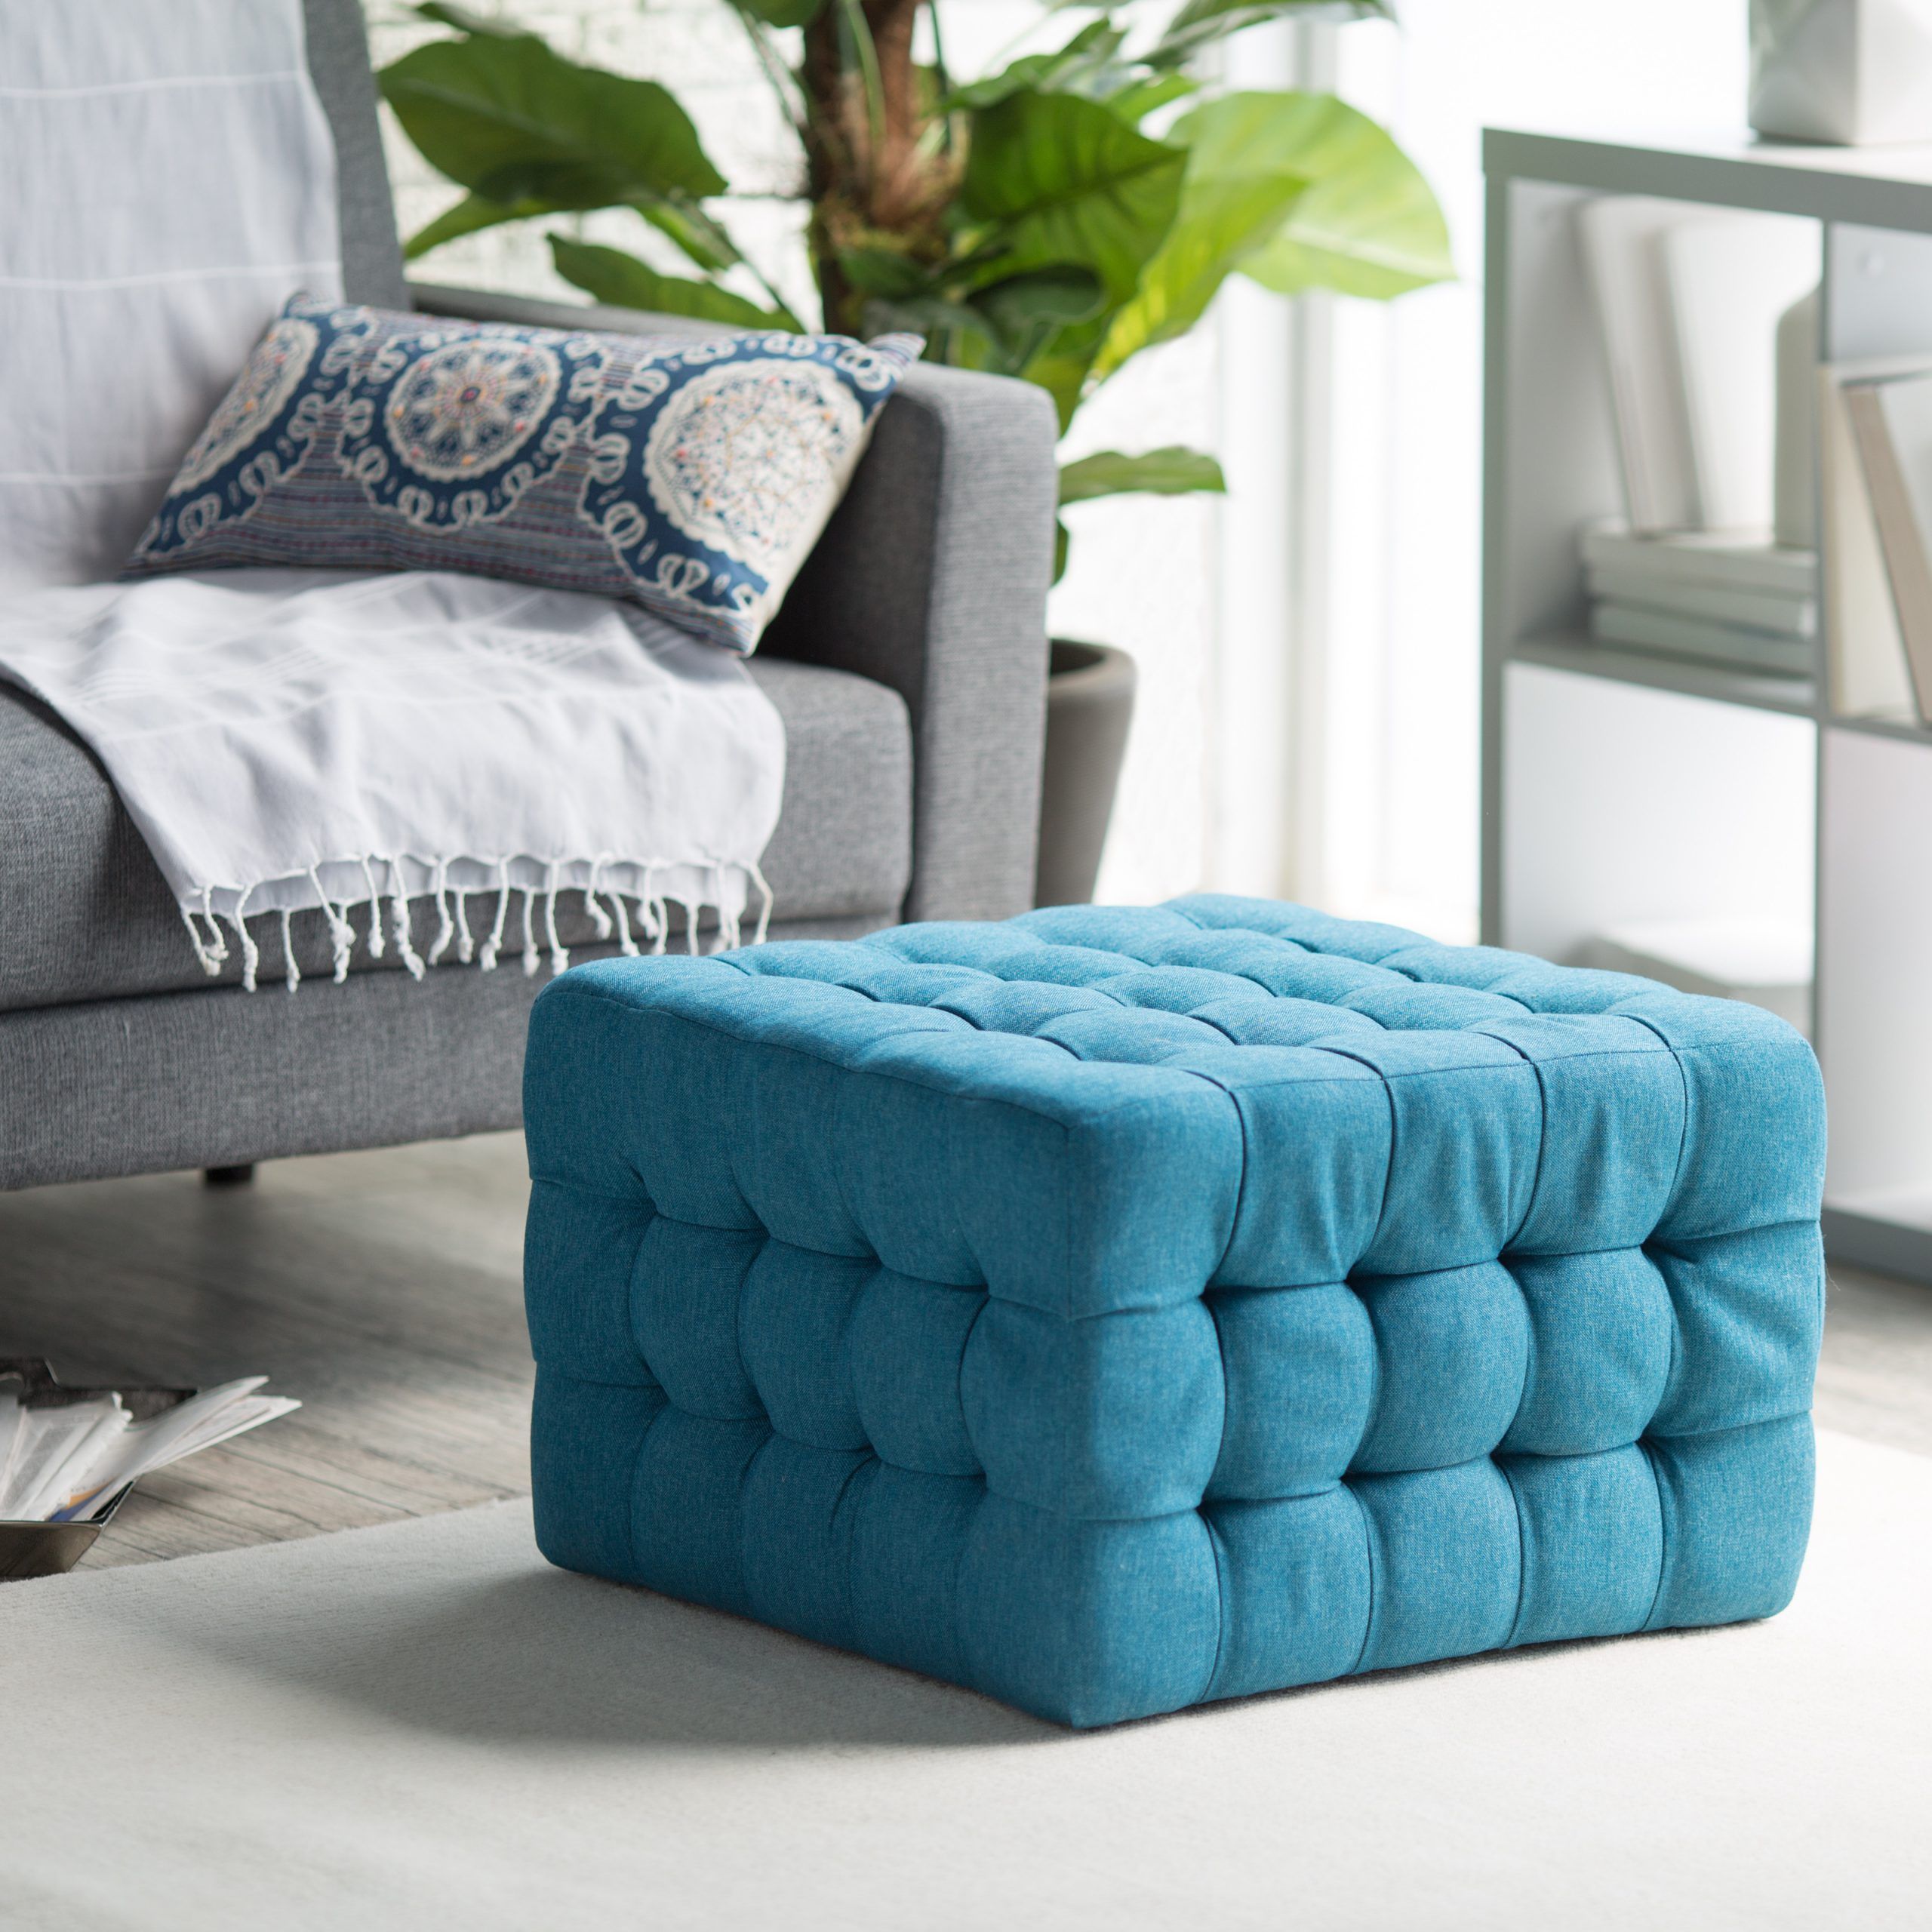 Belham Living Allover Tufted Square Ottoman – Teal – Ottomans At Hayneedle With Green Fabric Square Storage Ottomans With Pillows (View 5 of 20)